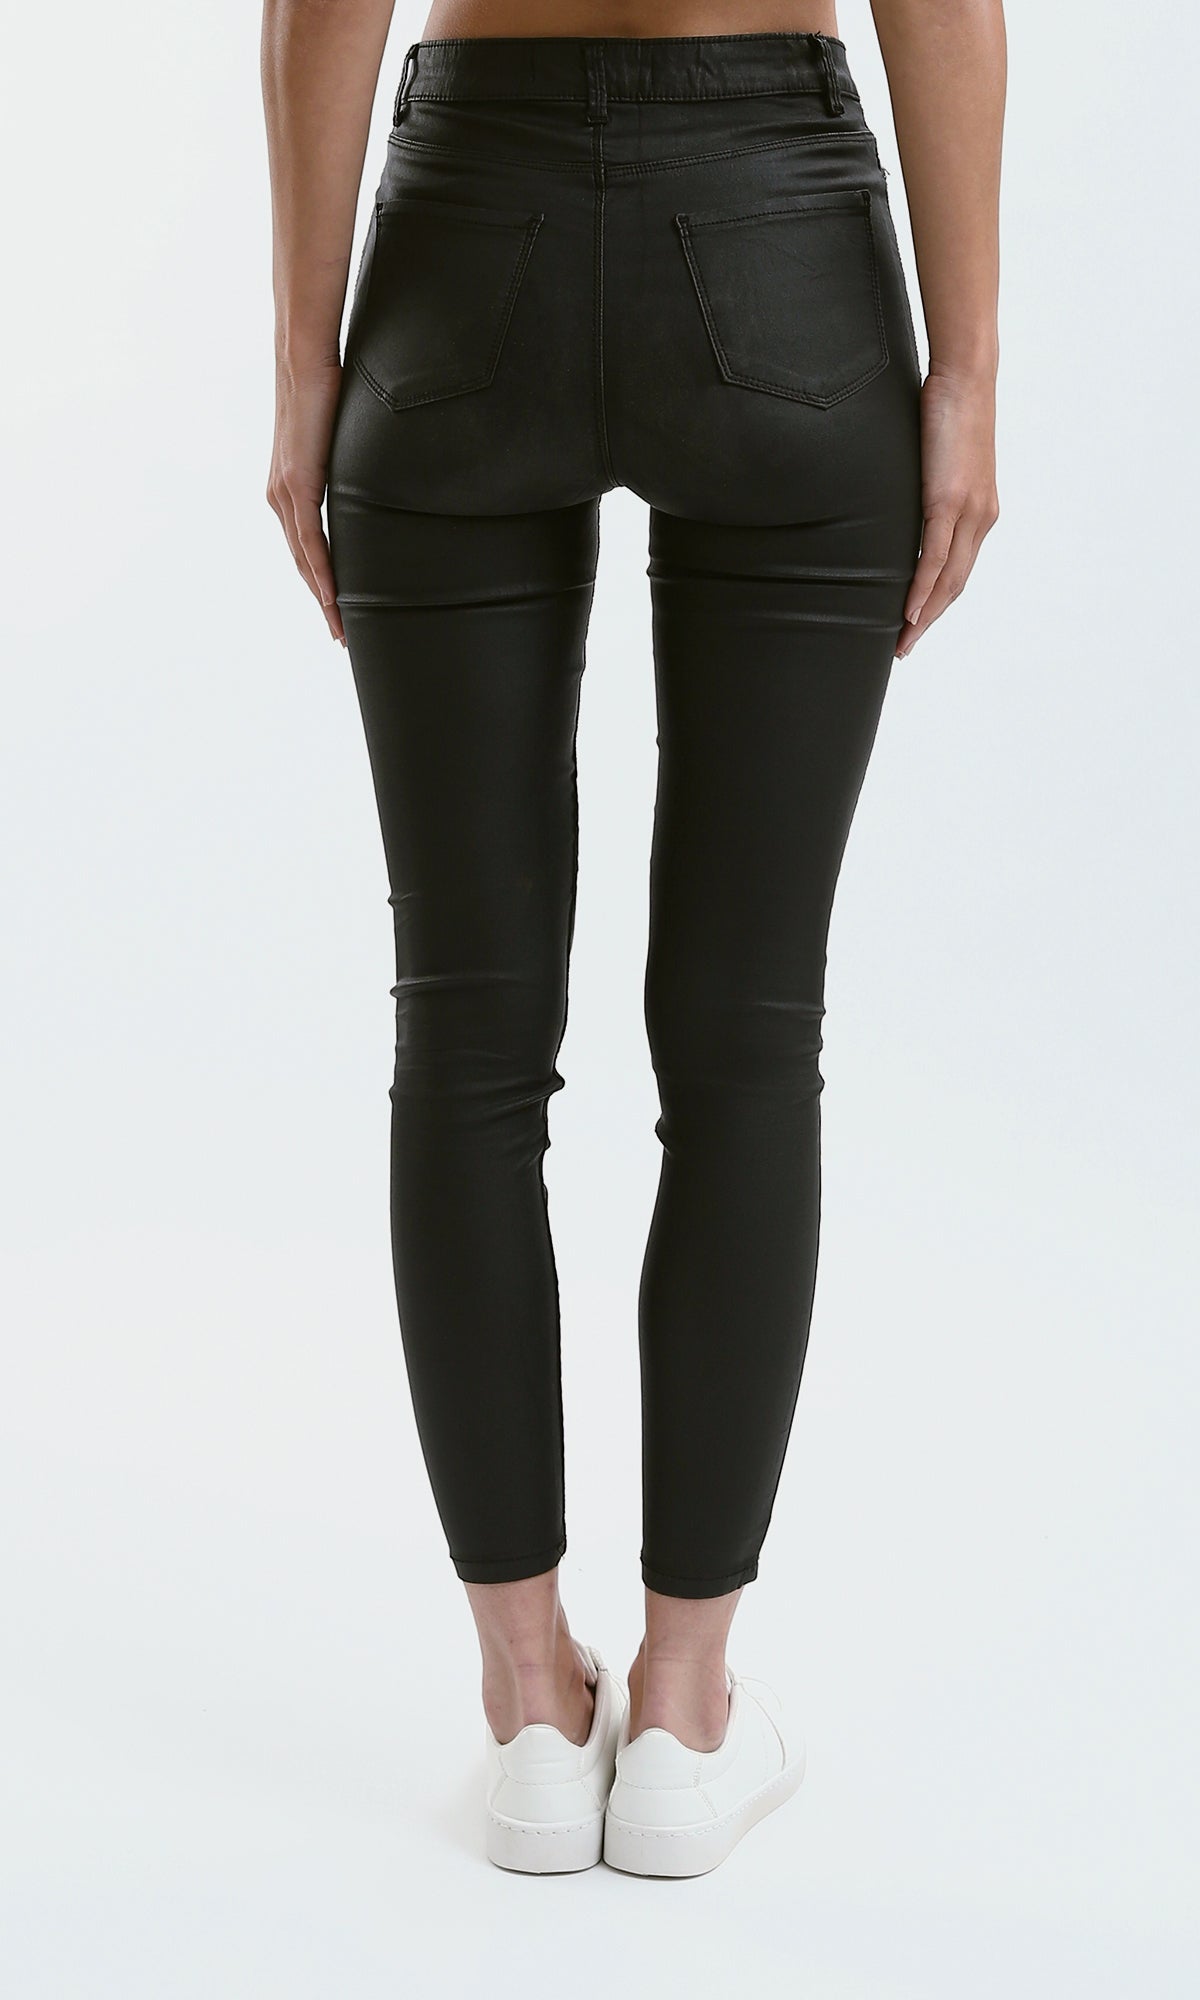 O188579 Black Leather Jeans With Belt Loops